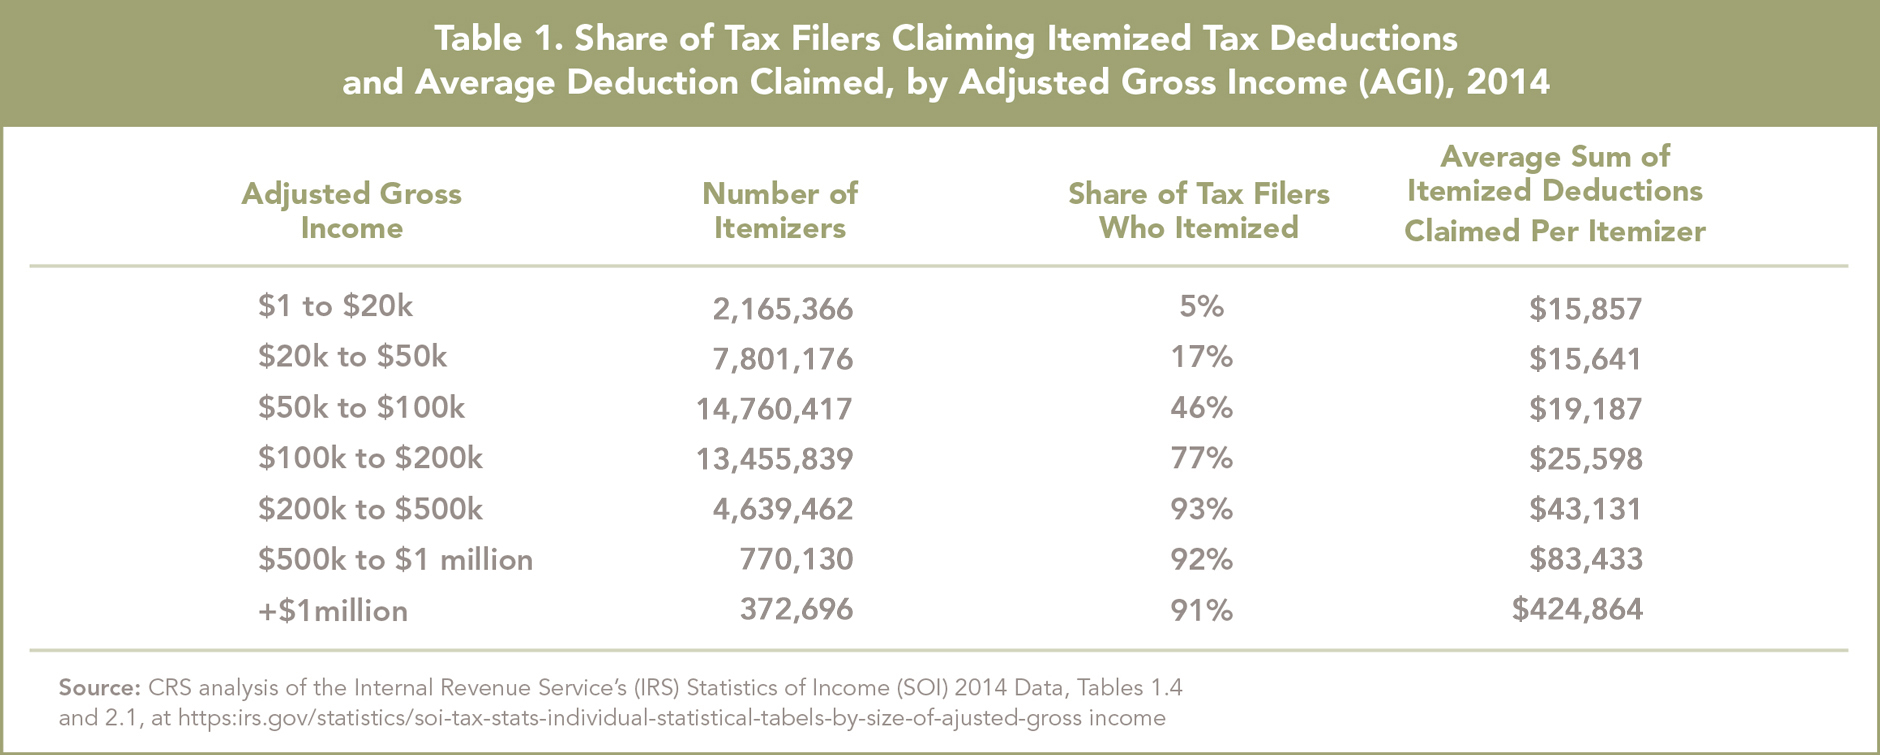 Share of Tax